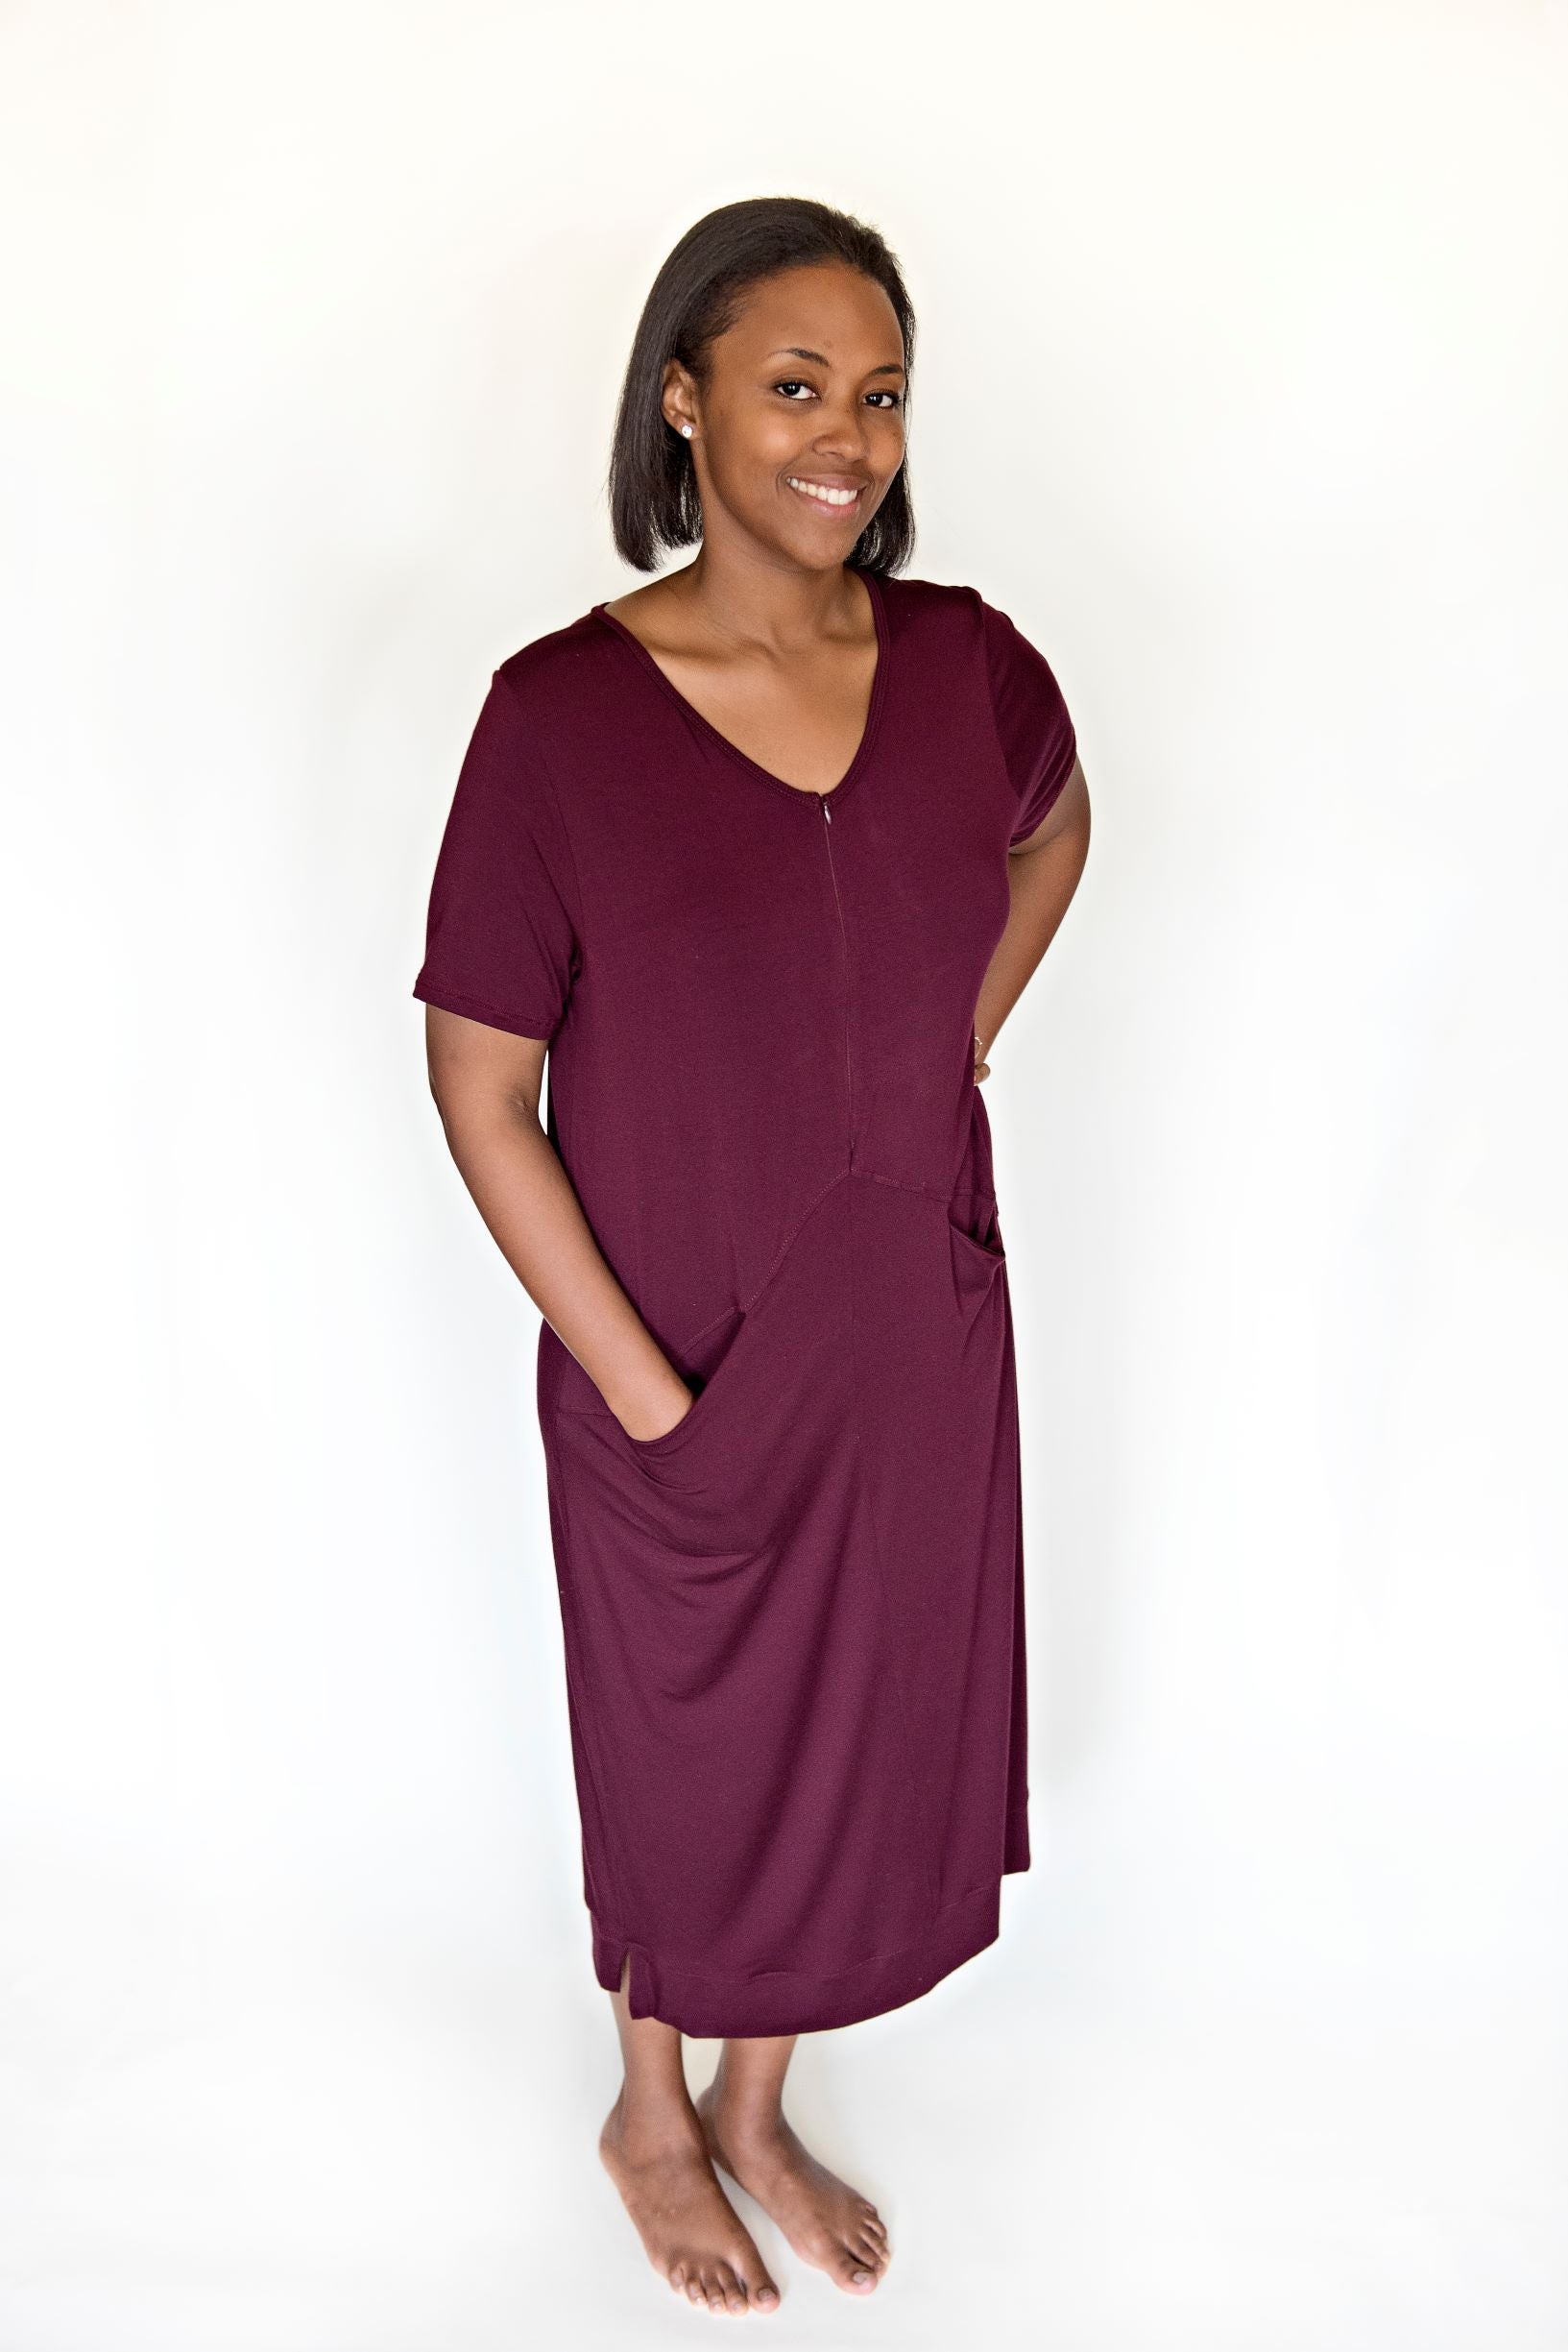 Long lounge dress in berry. Made from micromodal and spandex. Perfect house dress.